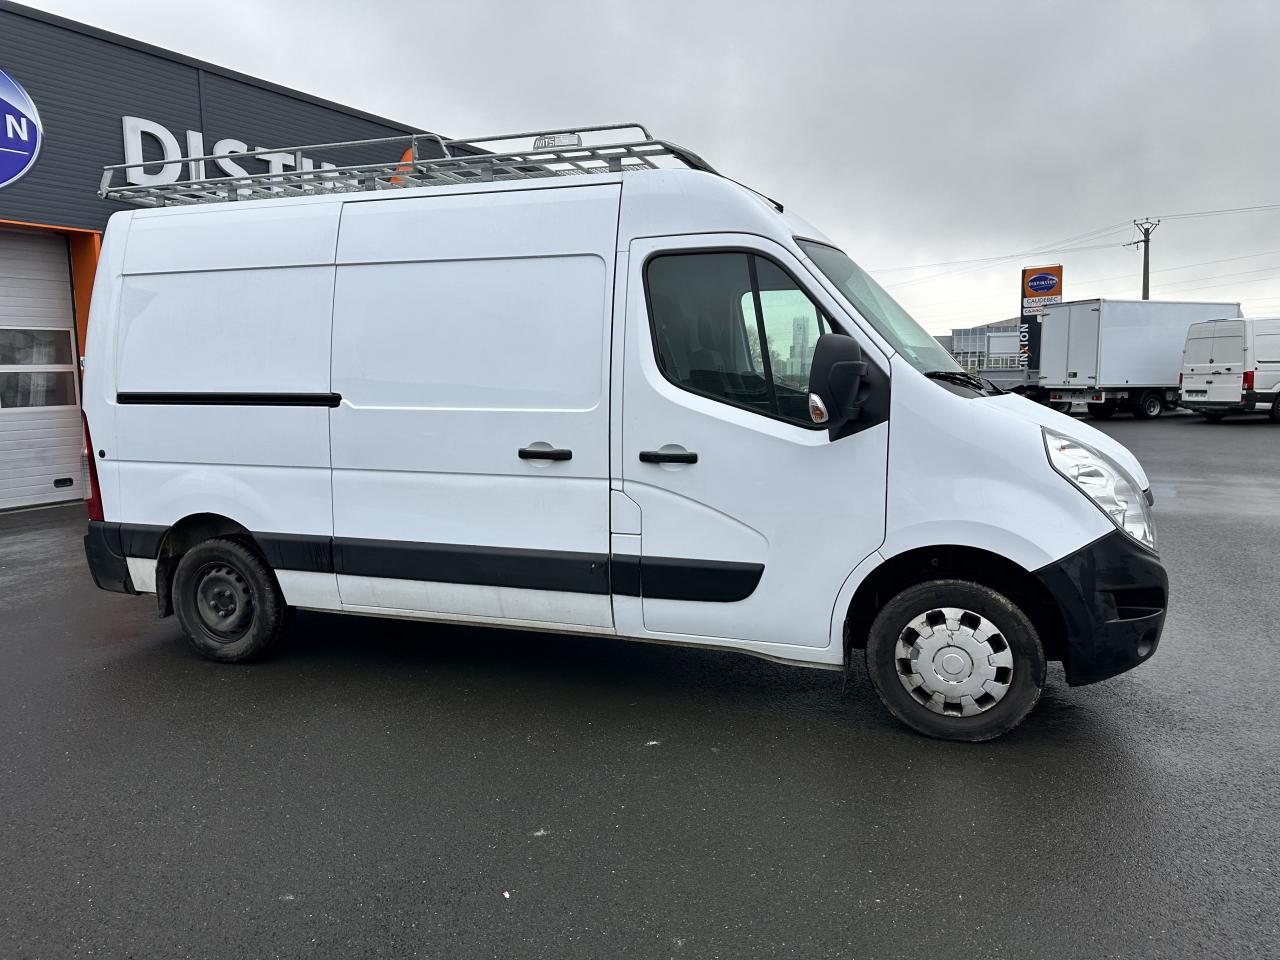 F.Automobiles - RENAULT MASTER III ph3 L2H2 TRACTION GRAND CONFORT